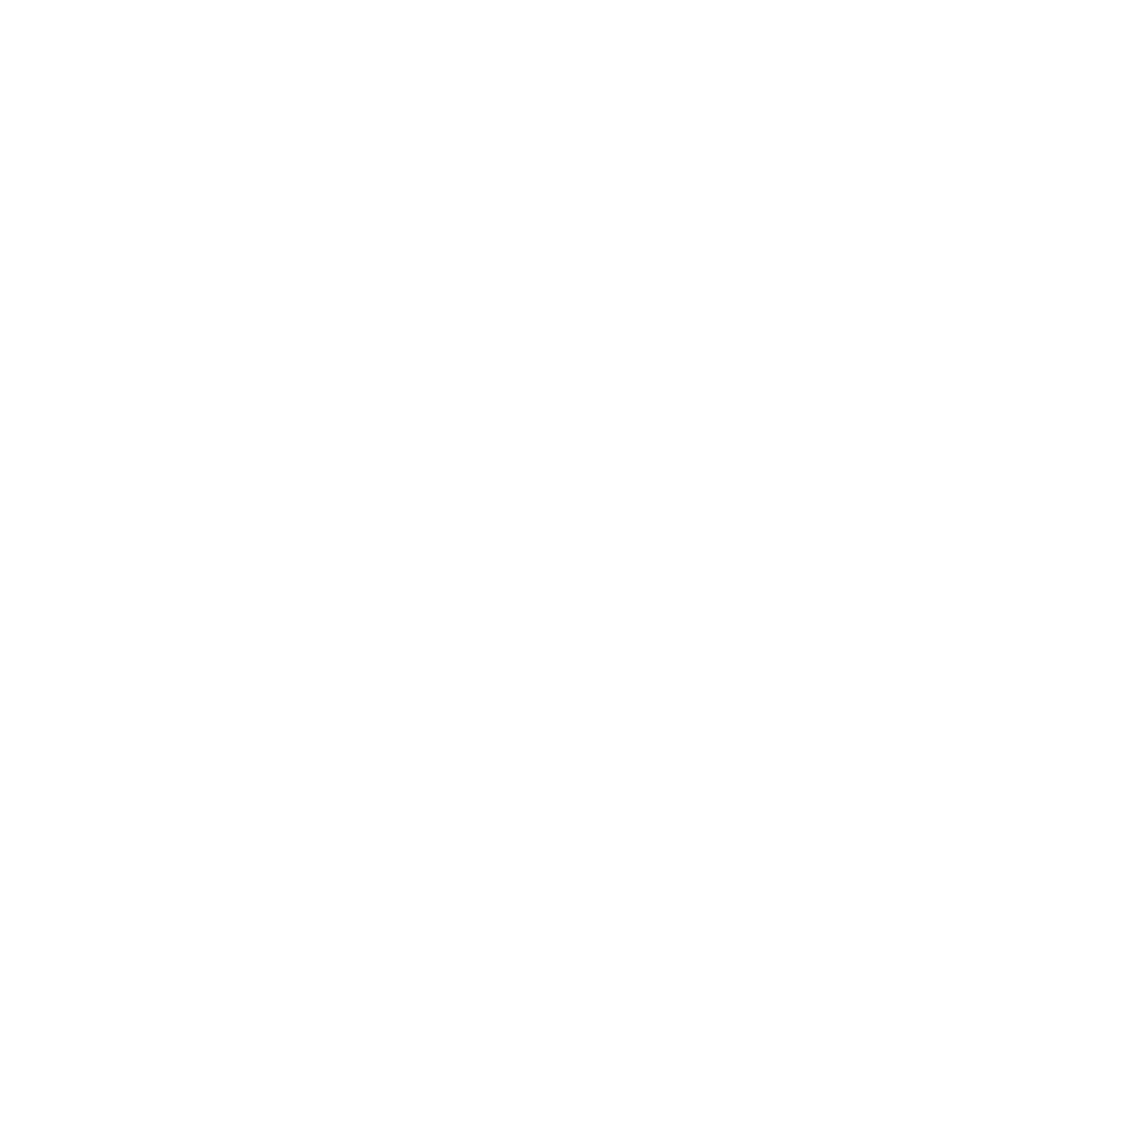 Confound Films - Video Production PEI, Canada